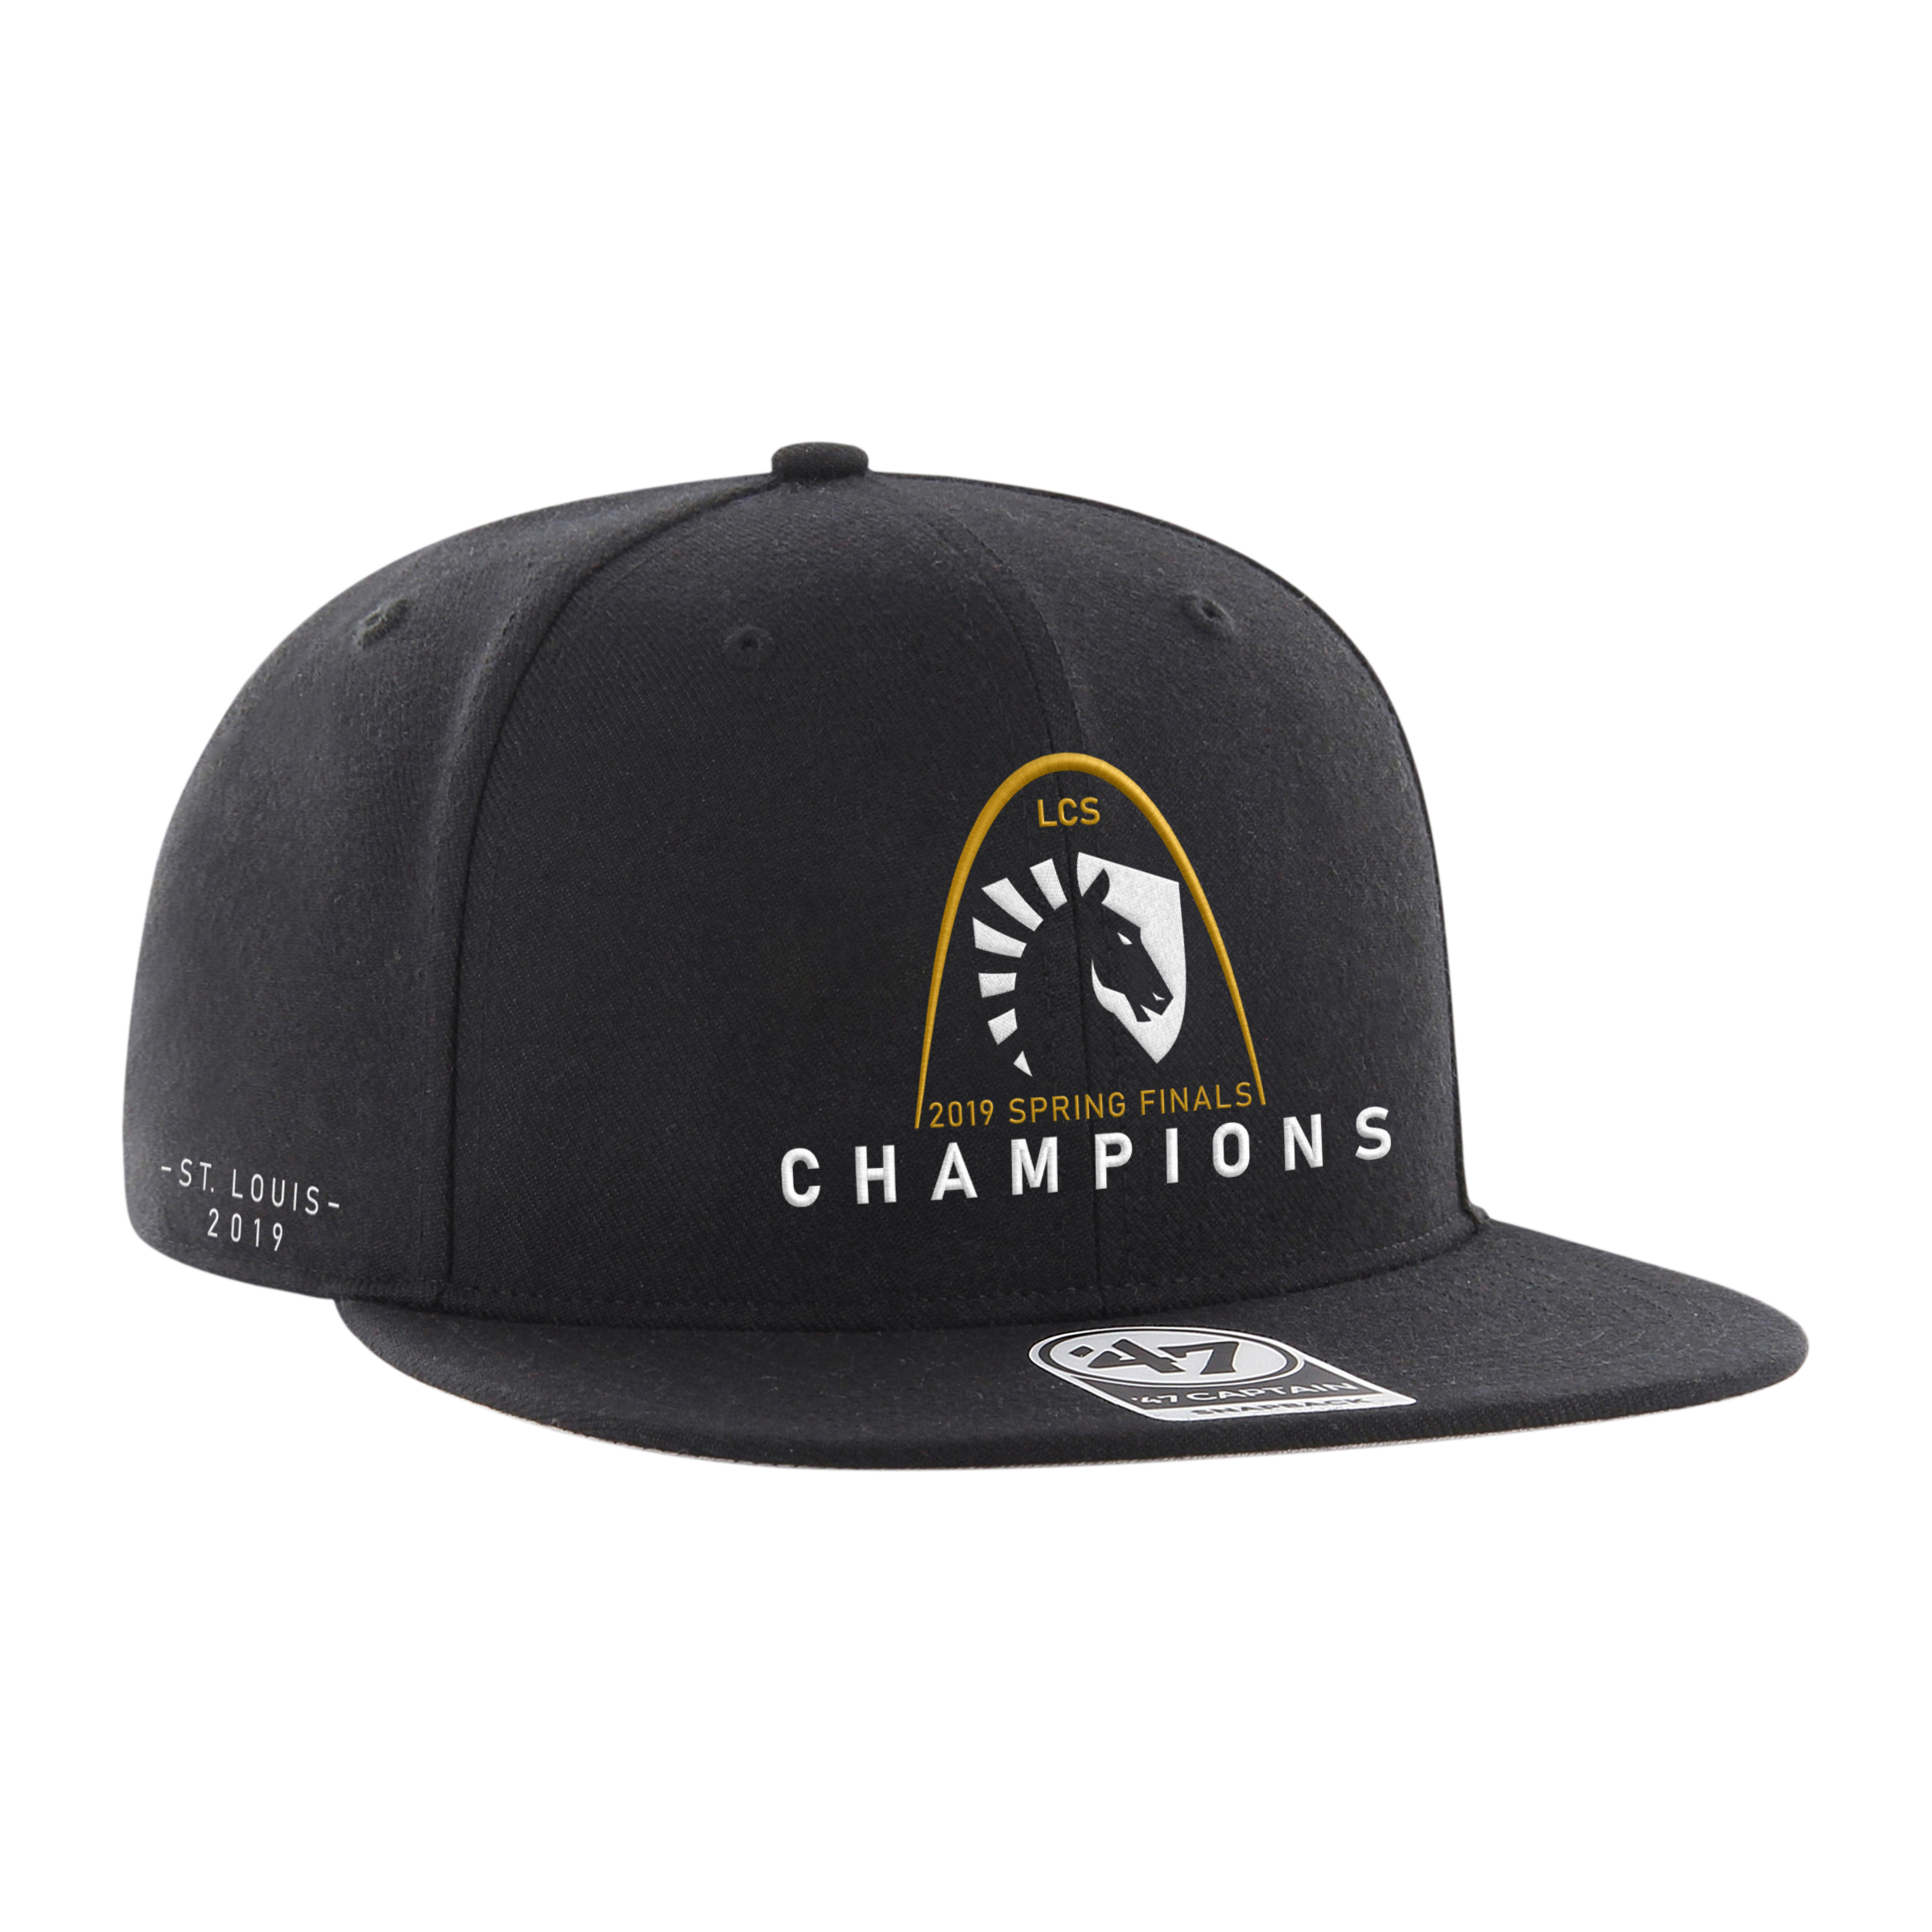 Team Liquid's LCS Spring Finals victory hat, produced by '47. 